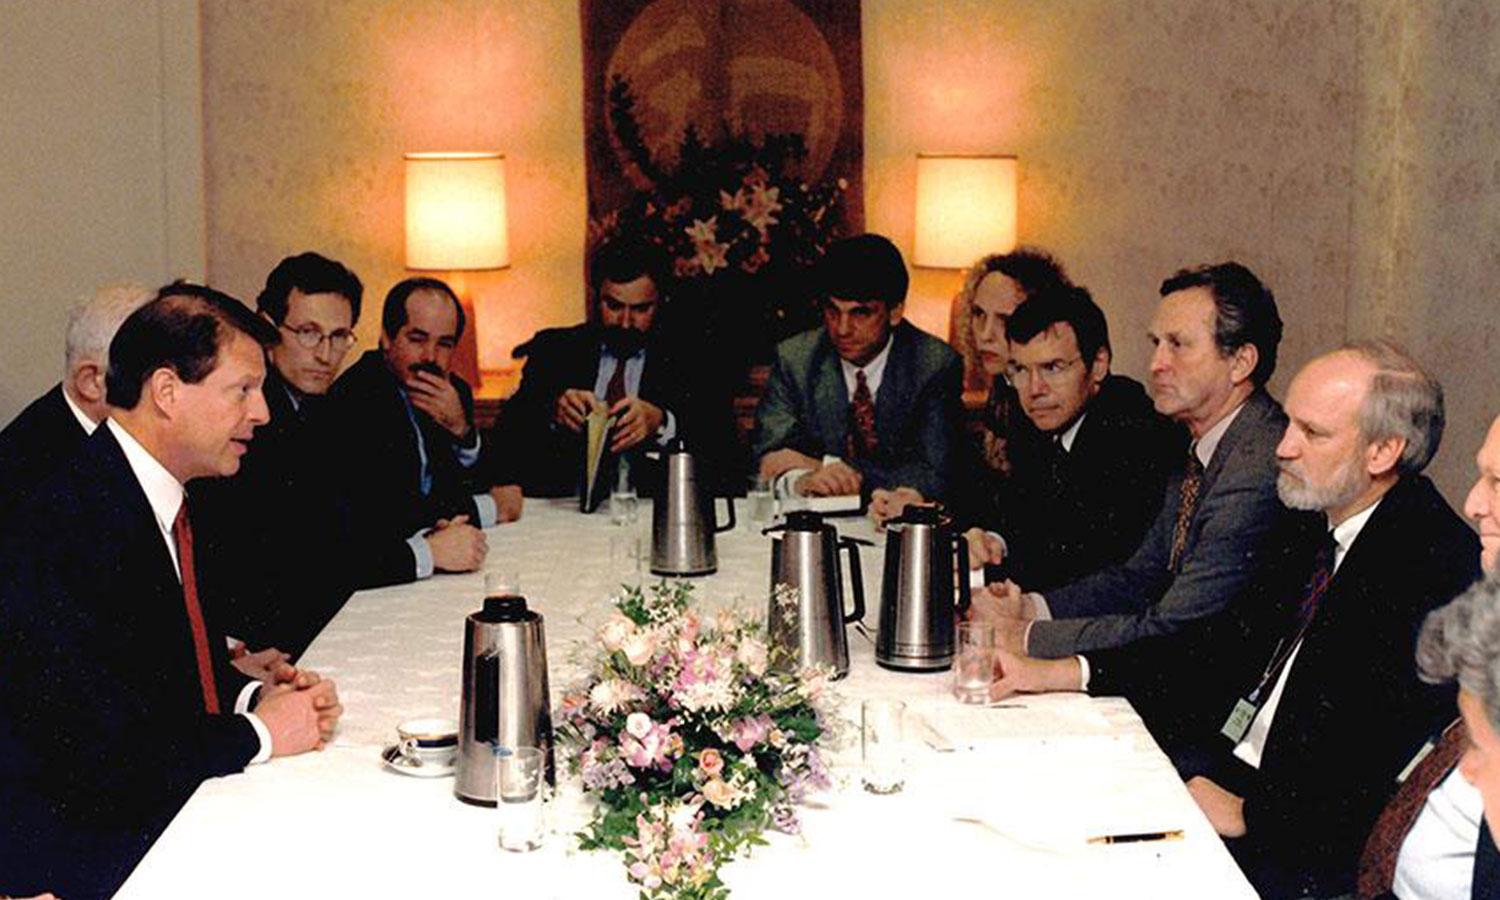 COP 3 members seated at table in Kyoto